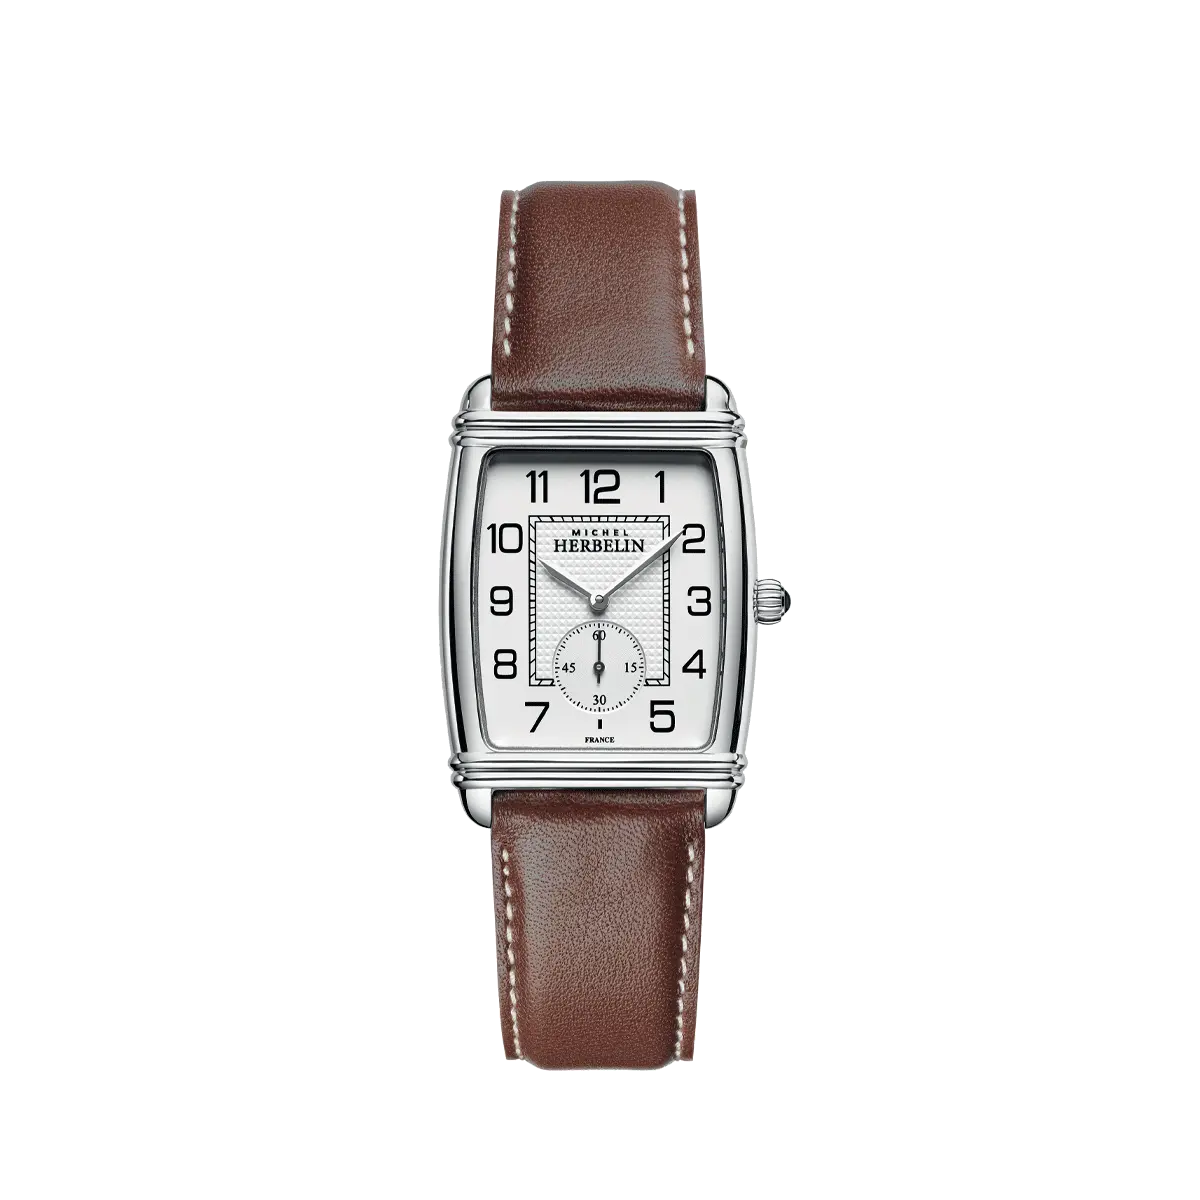 Michel Herbelin Art Deco Watch with Brown Leather Strap